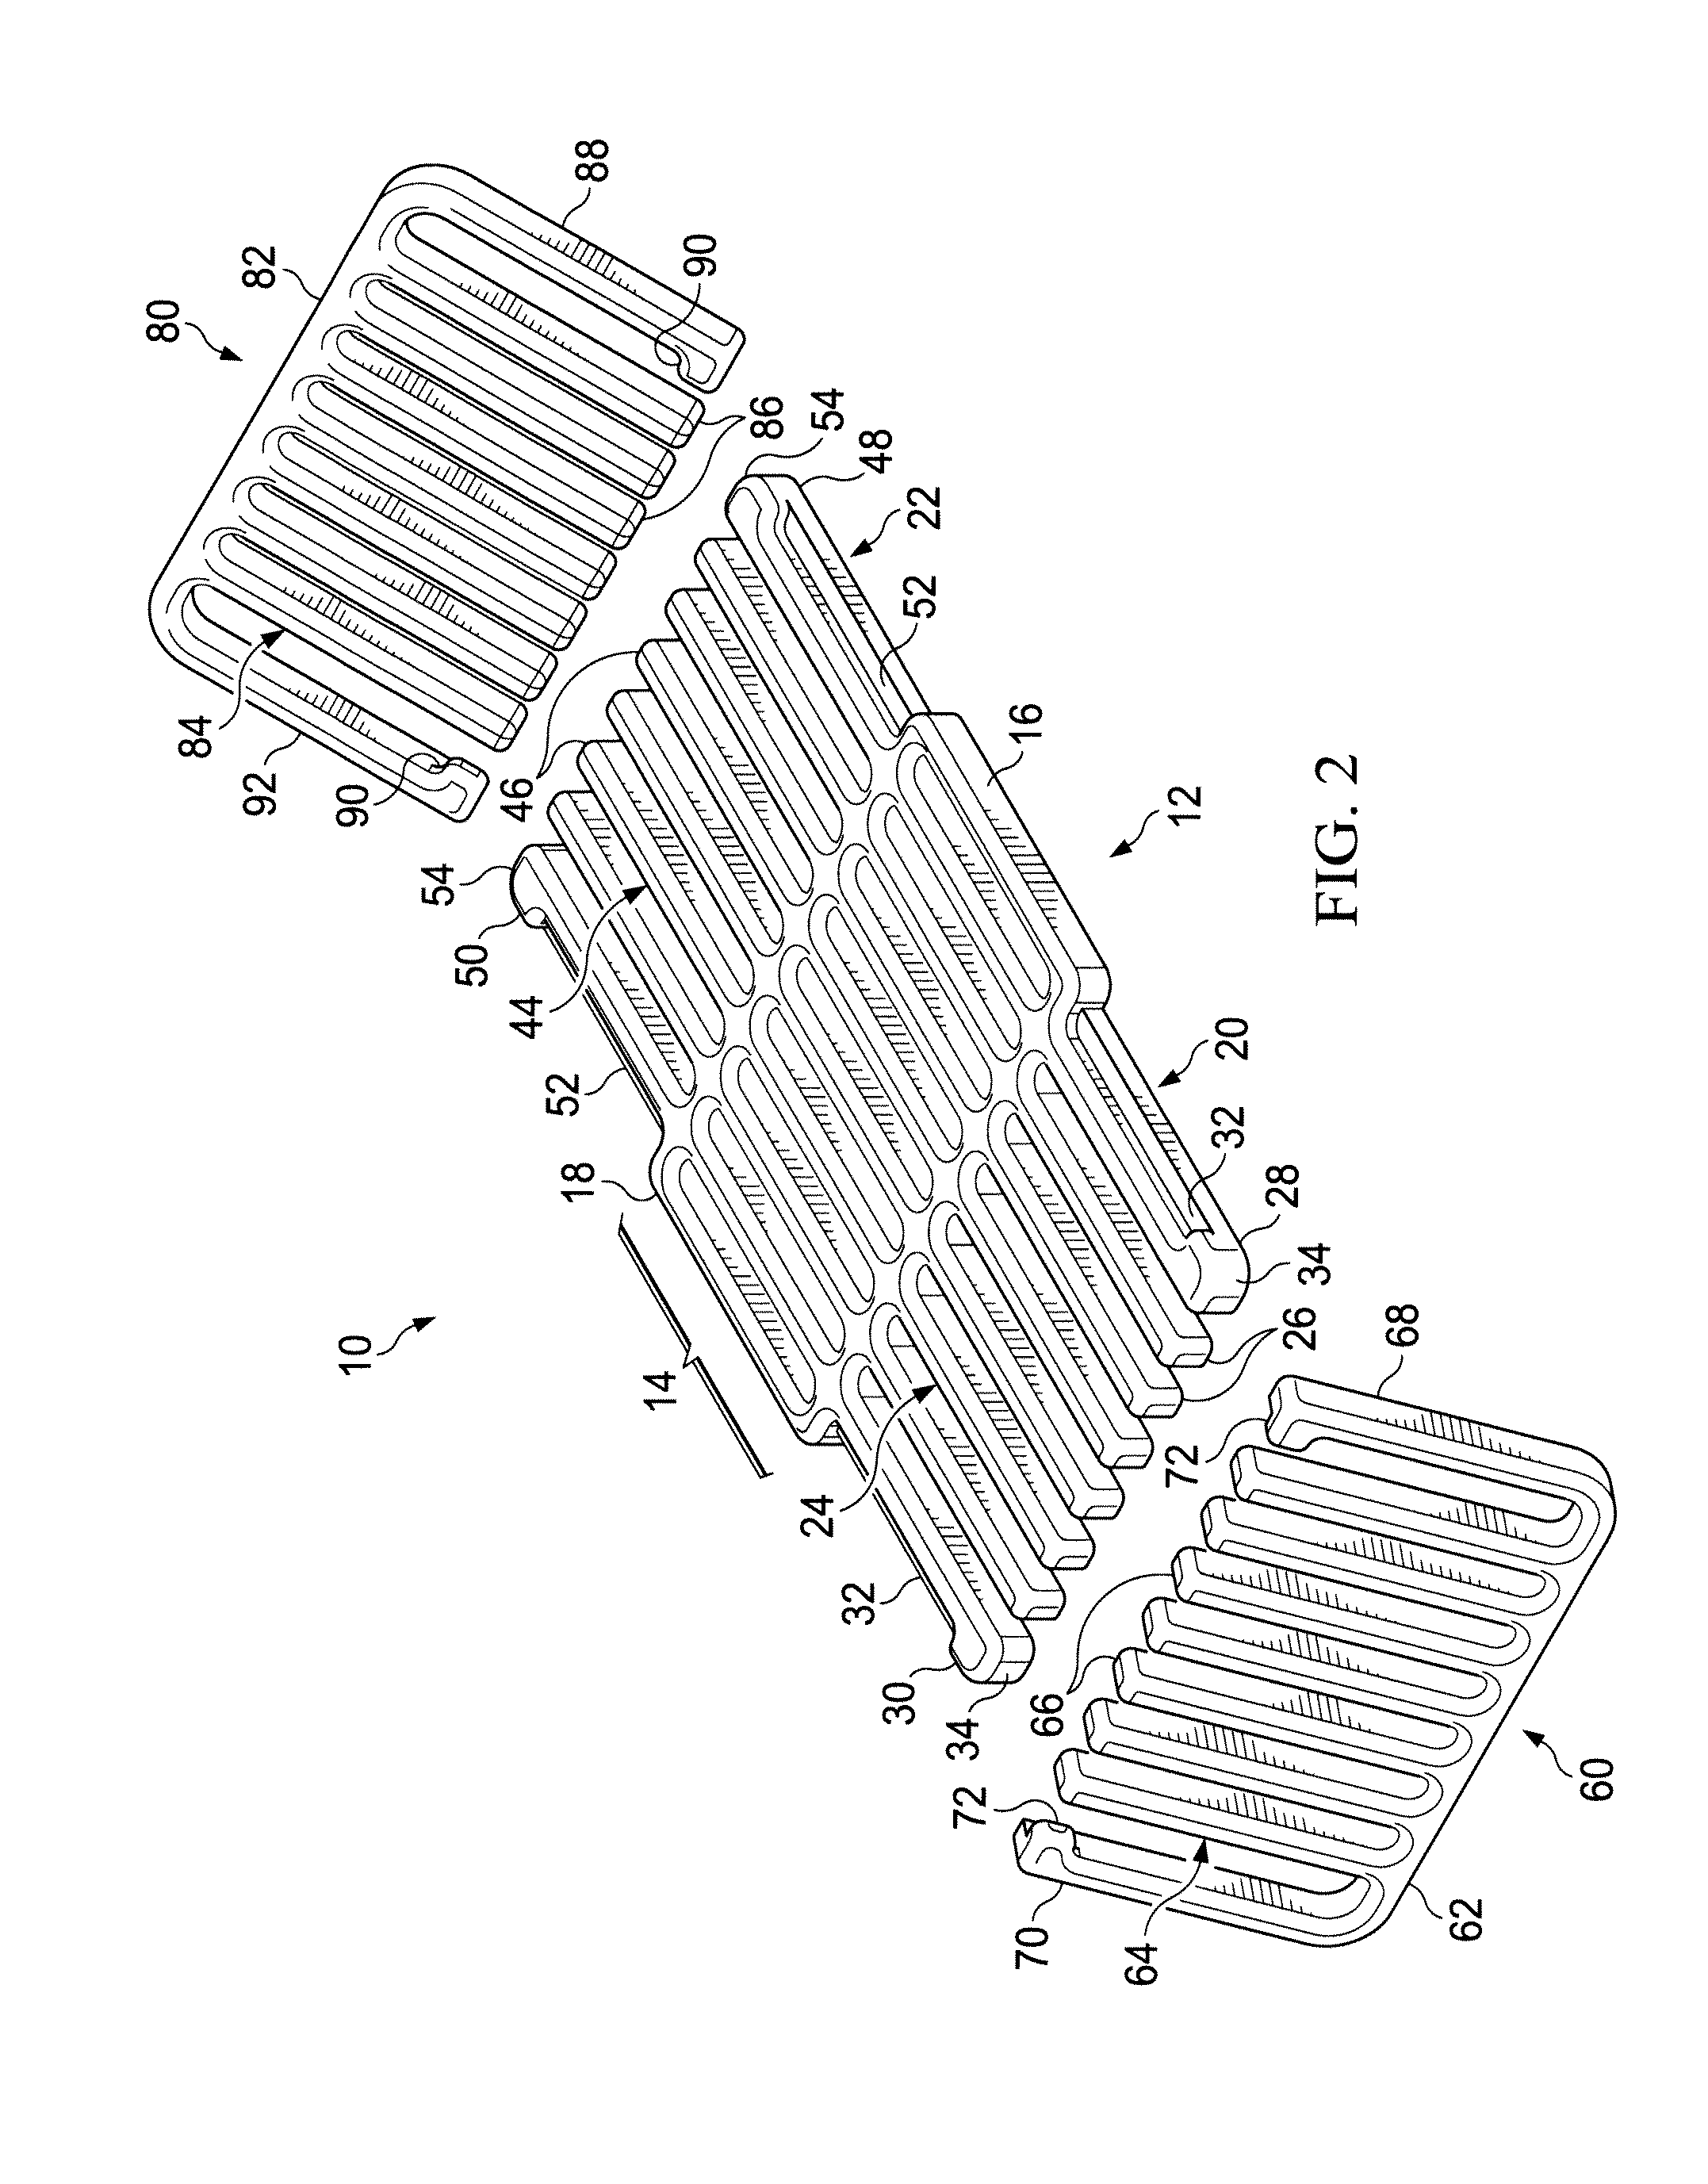 Adjustable cooking grate for barbeque grills